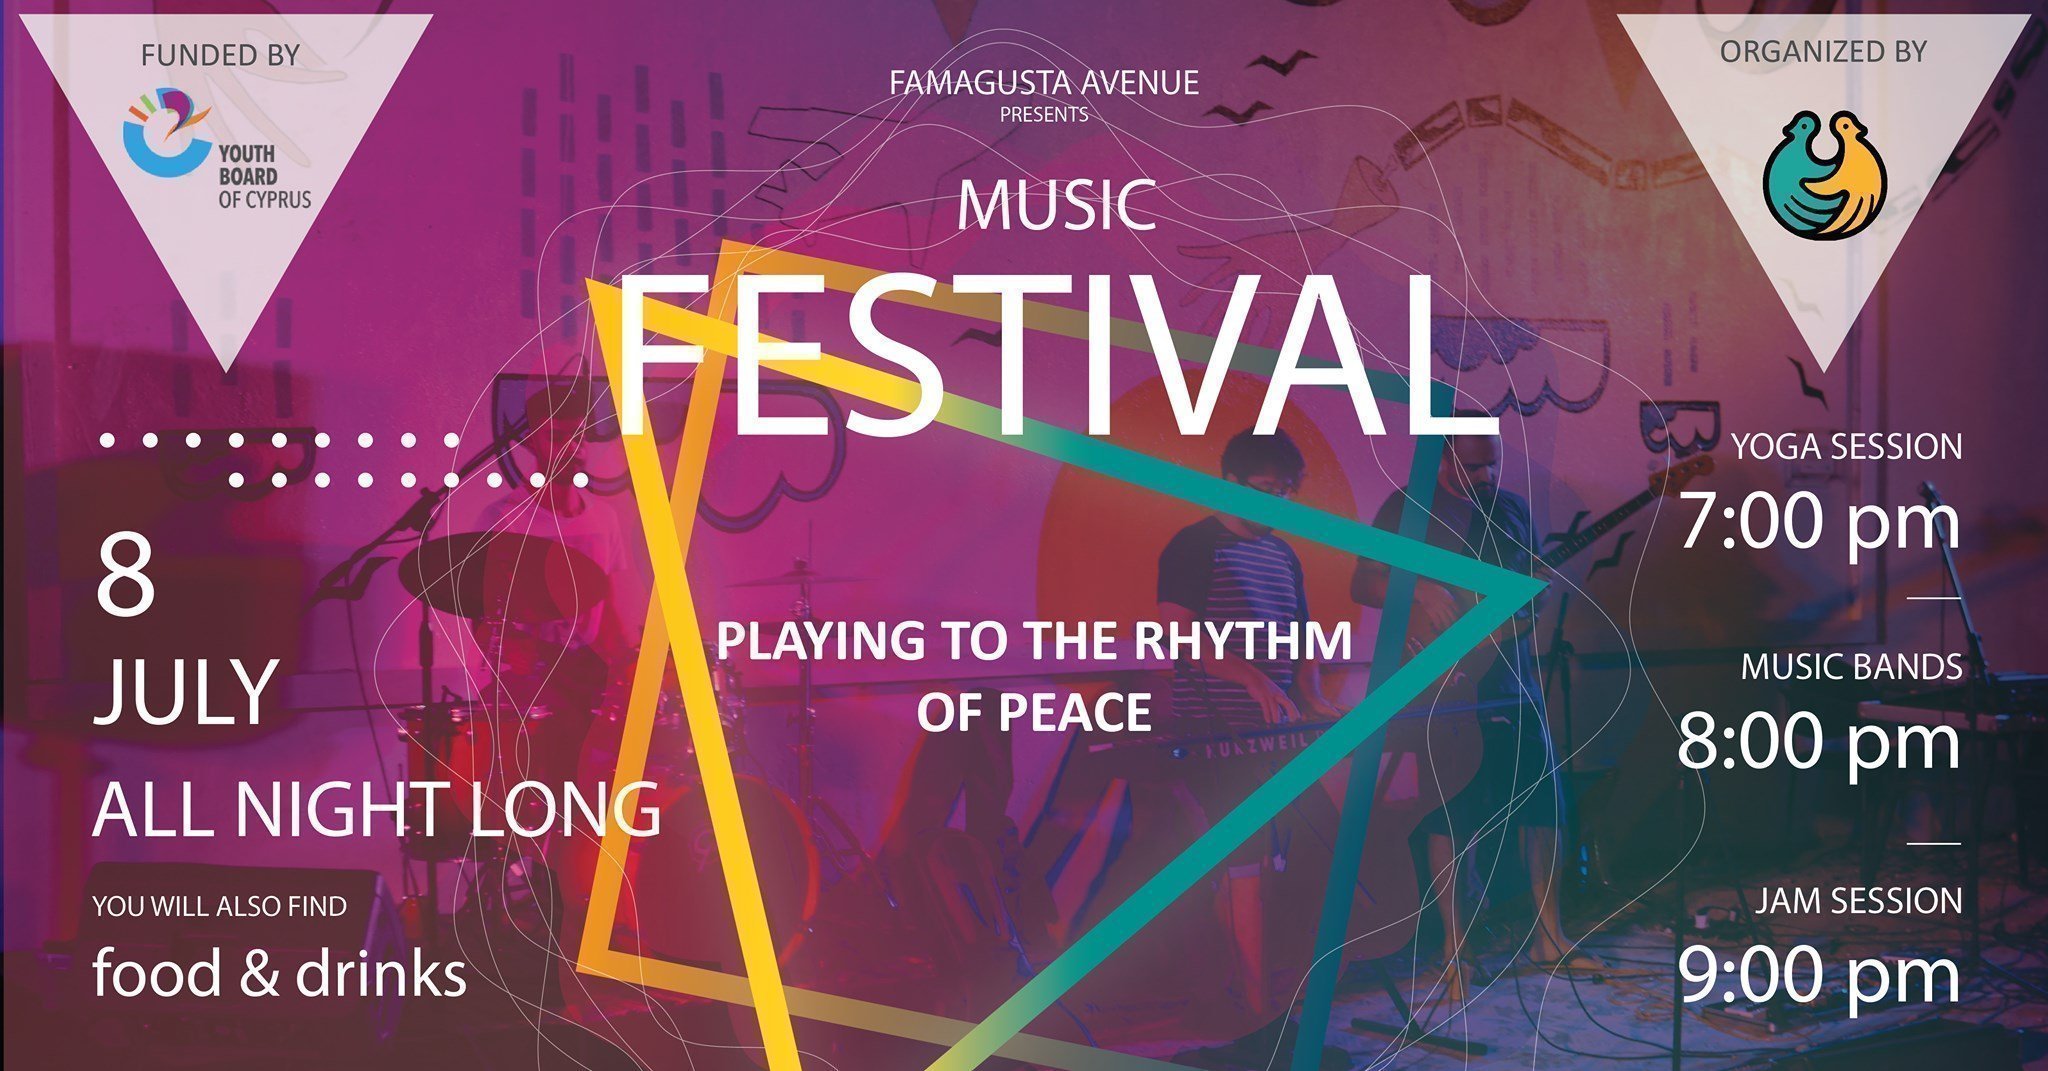 Music Festival: Playing to the Rhythm of Peace